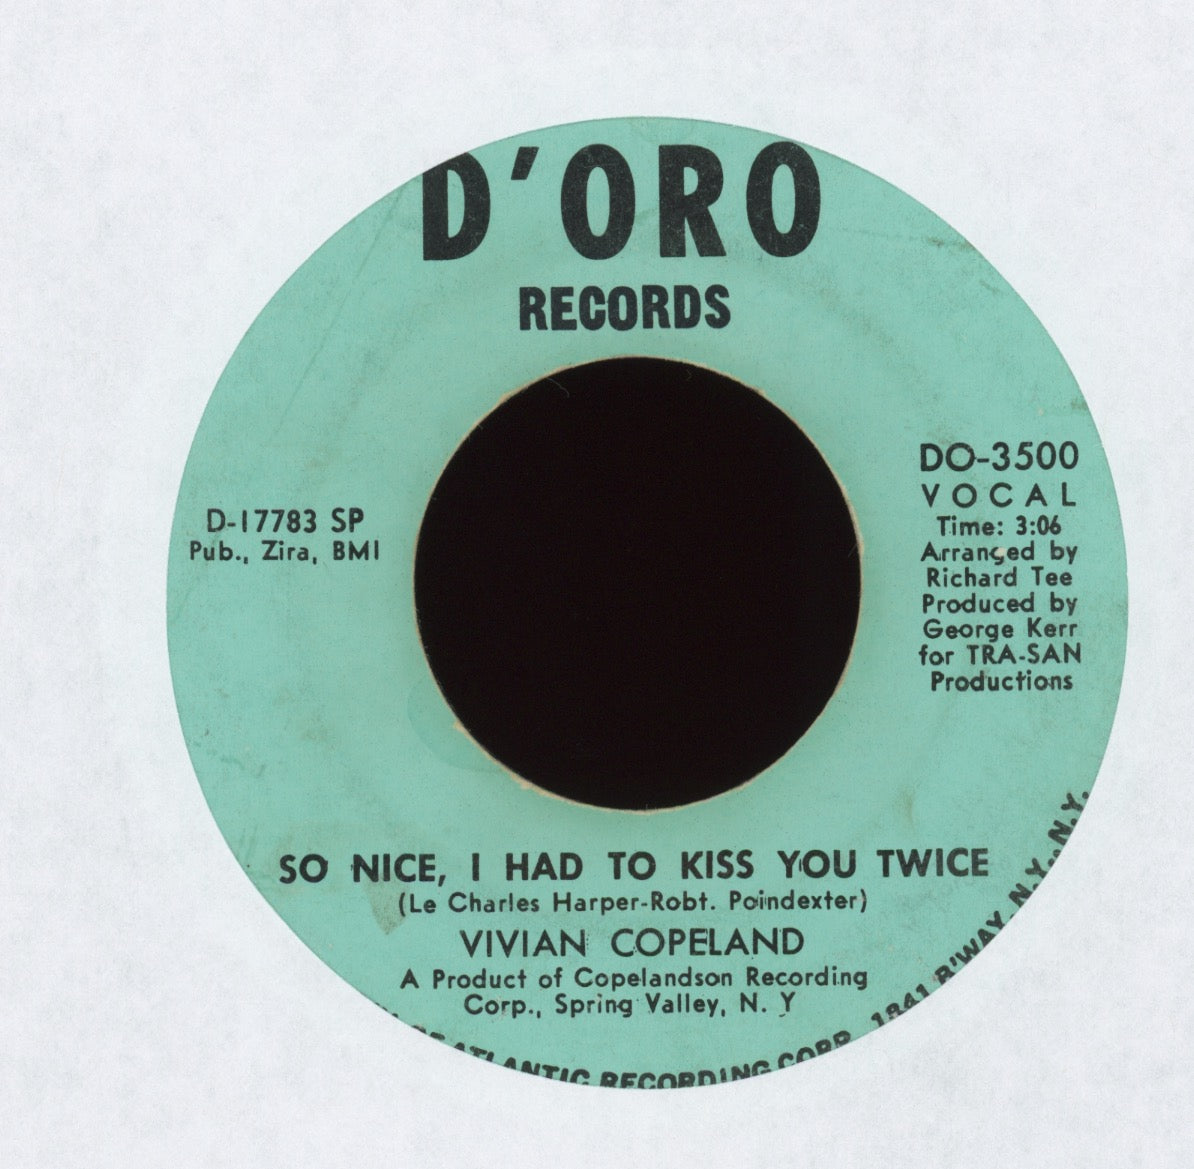 Vivian Copeland - He Knows My Key (Is Always In The Mailbox) on D'Oro Northern Soul 45